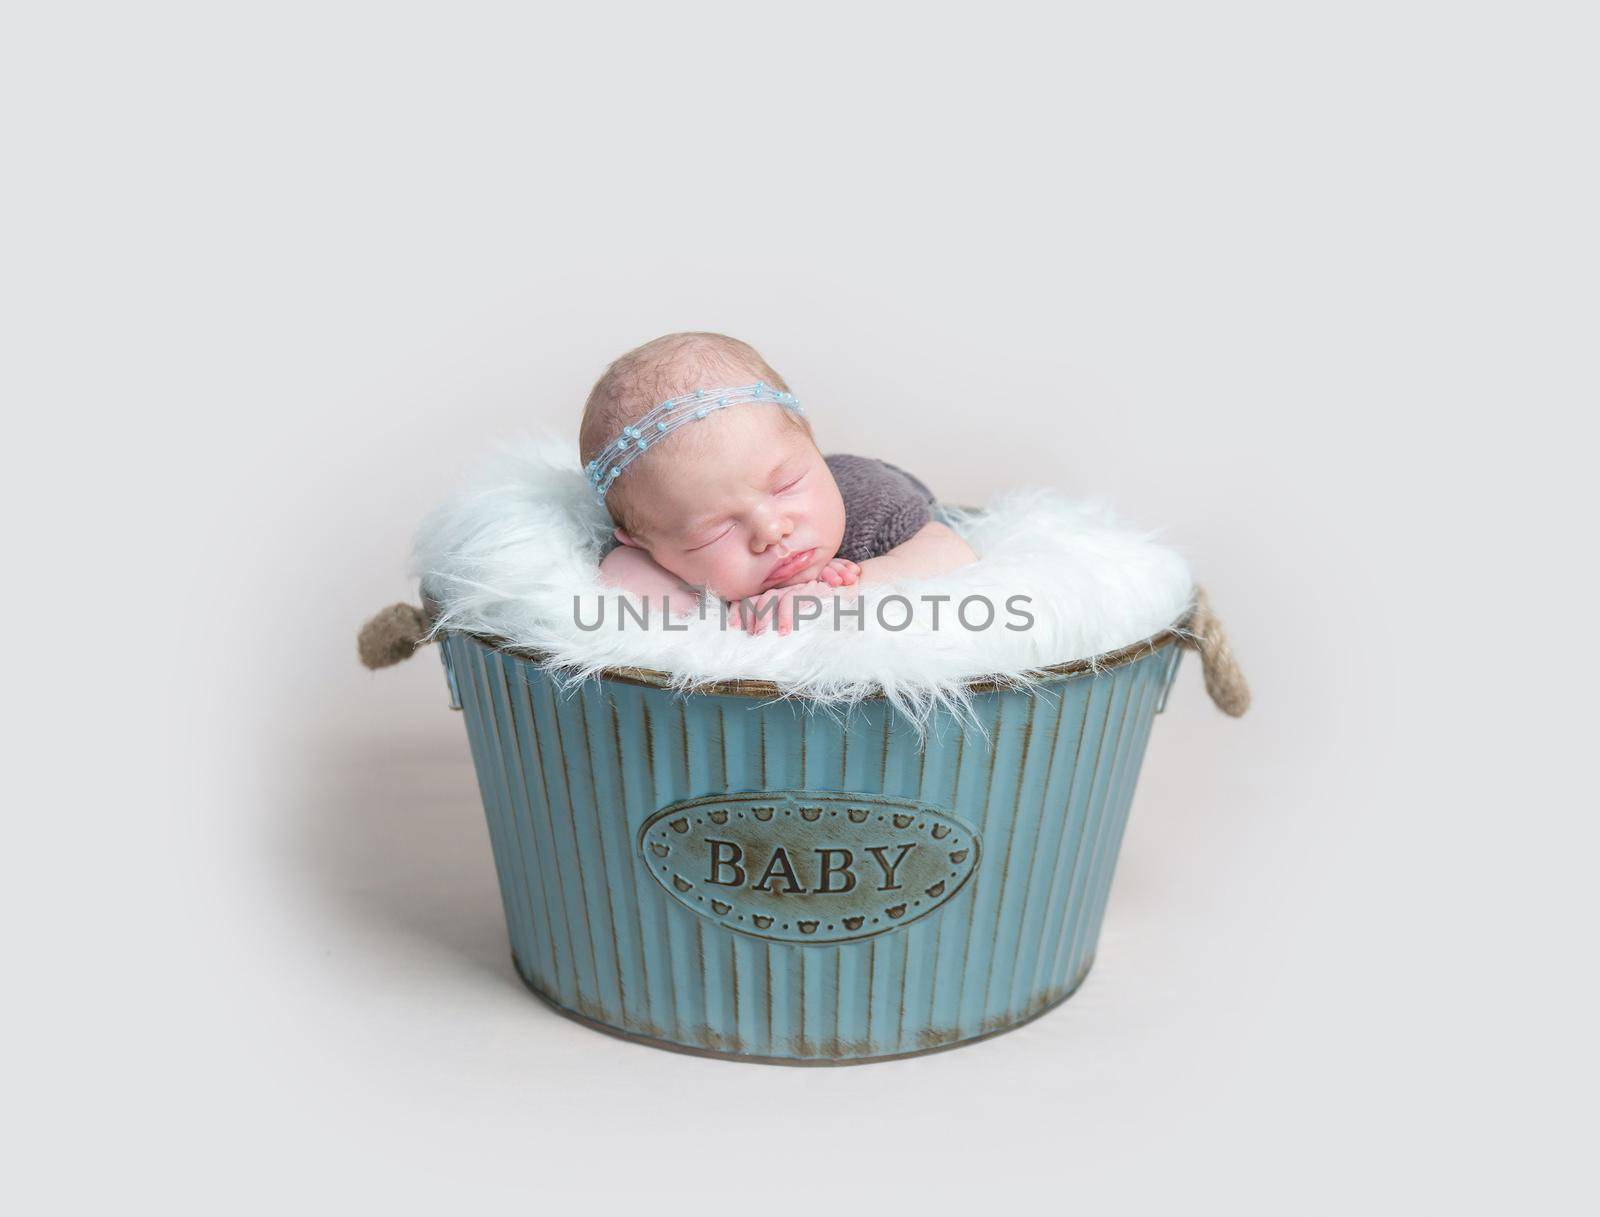 Sweet child napping, dressed in brown knitted suit, in a blue metal basket